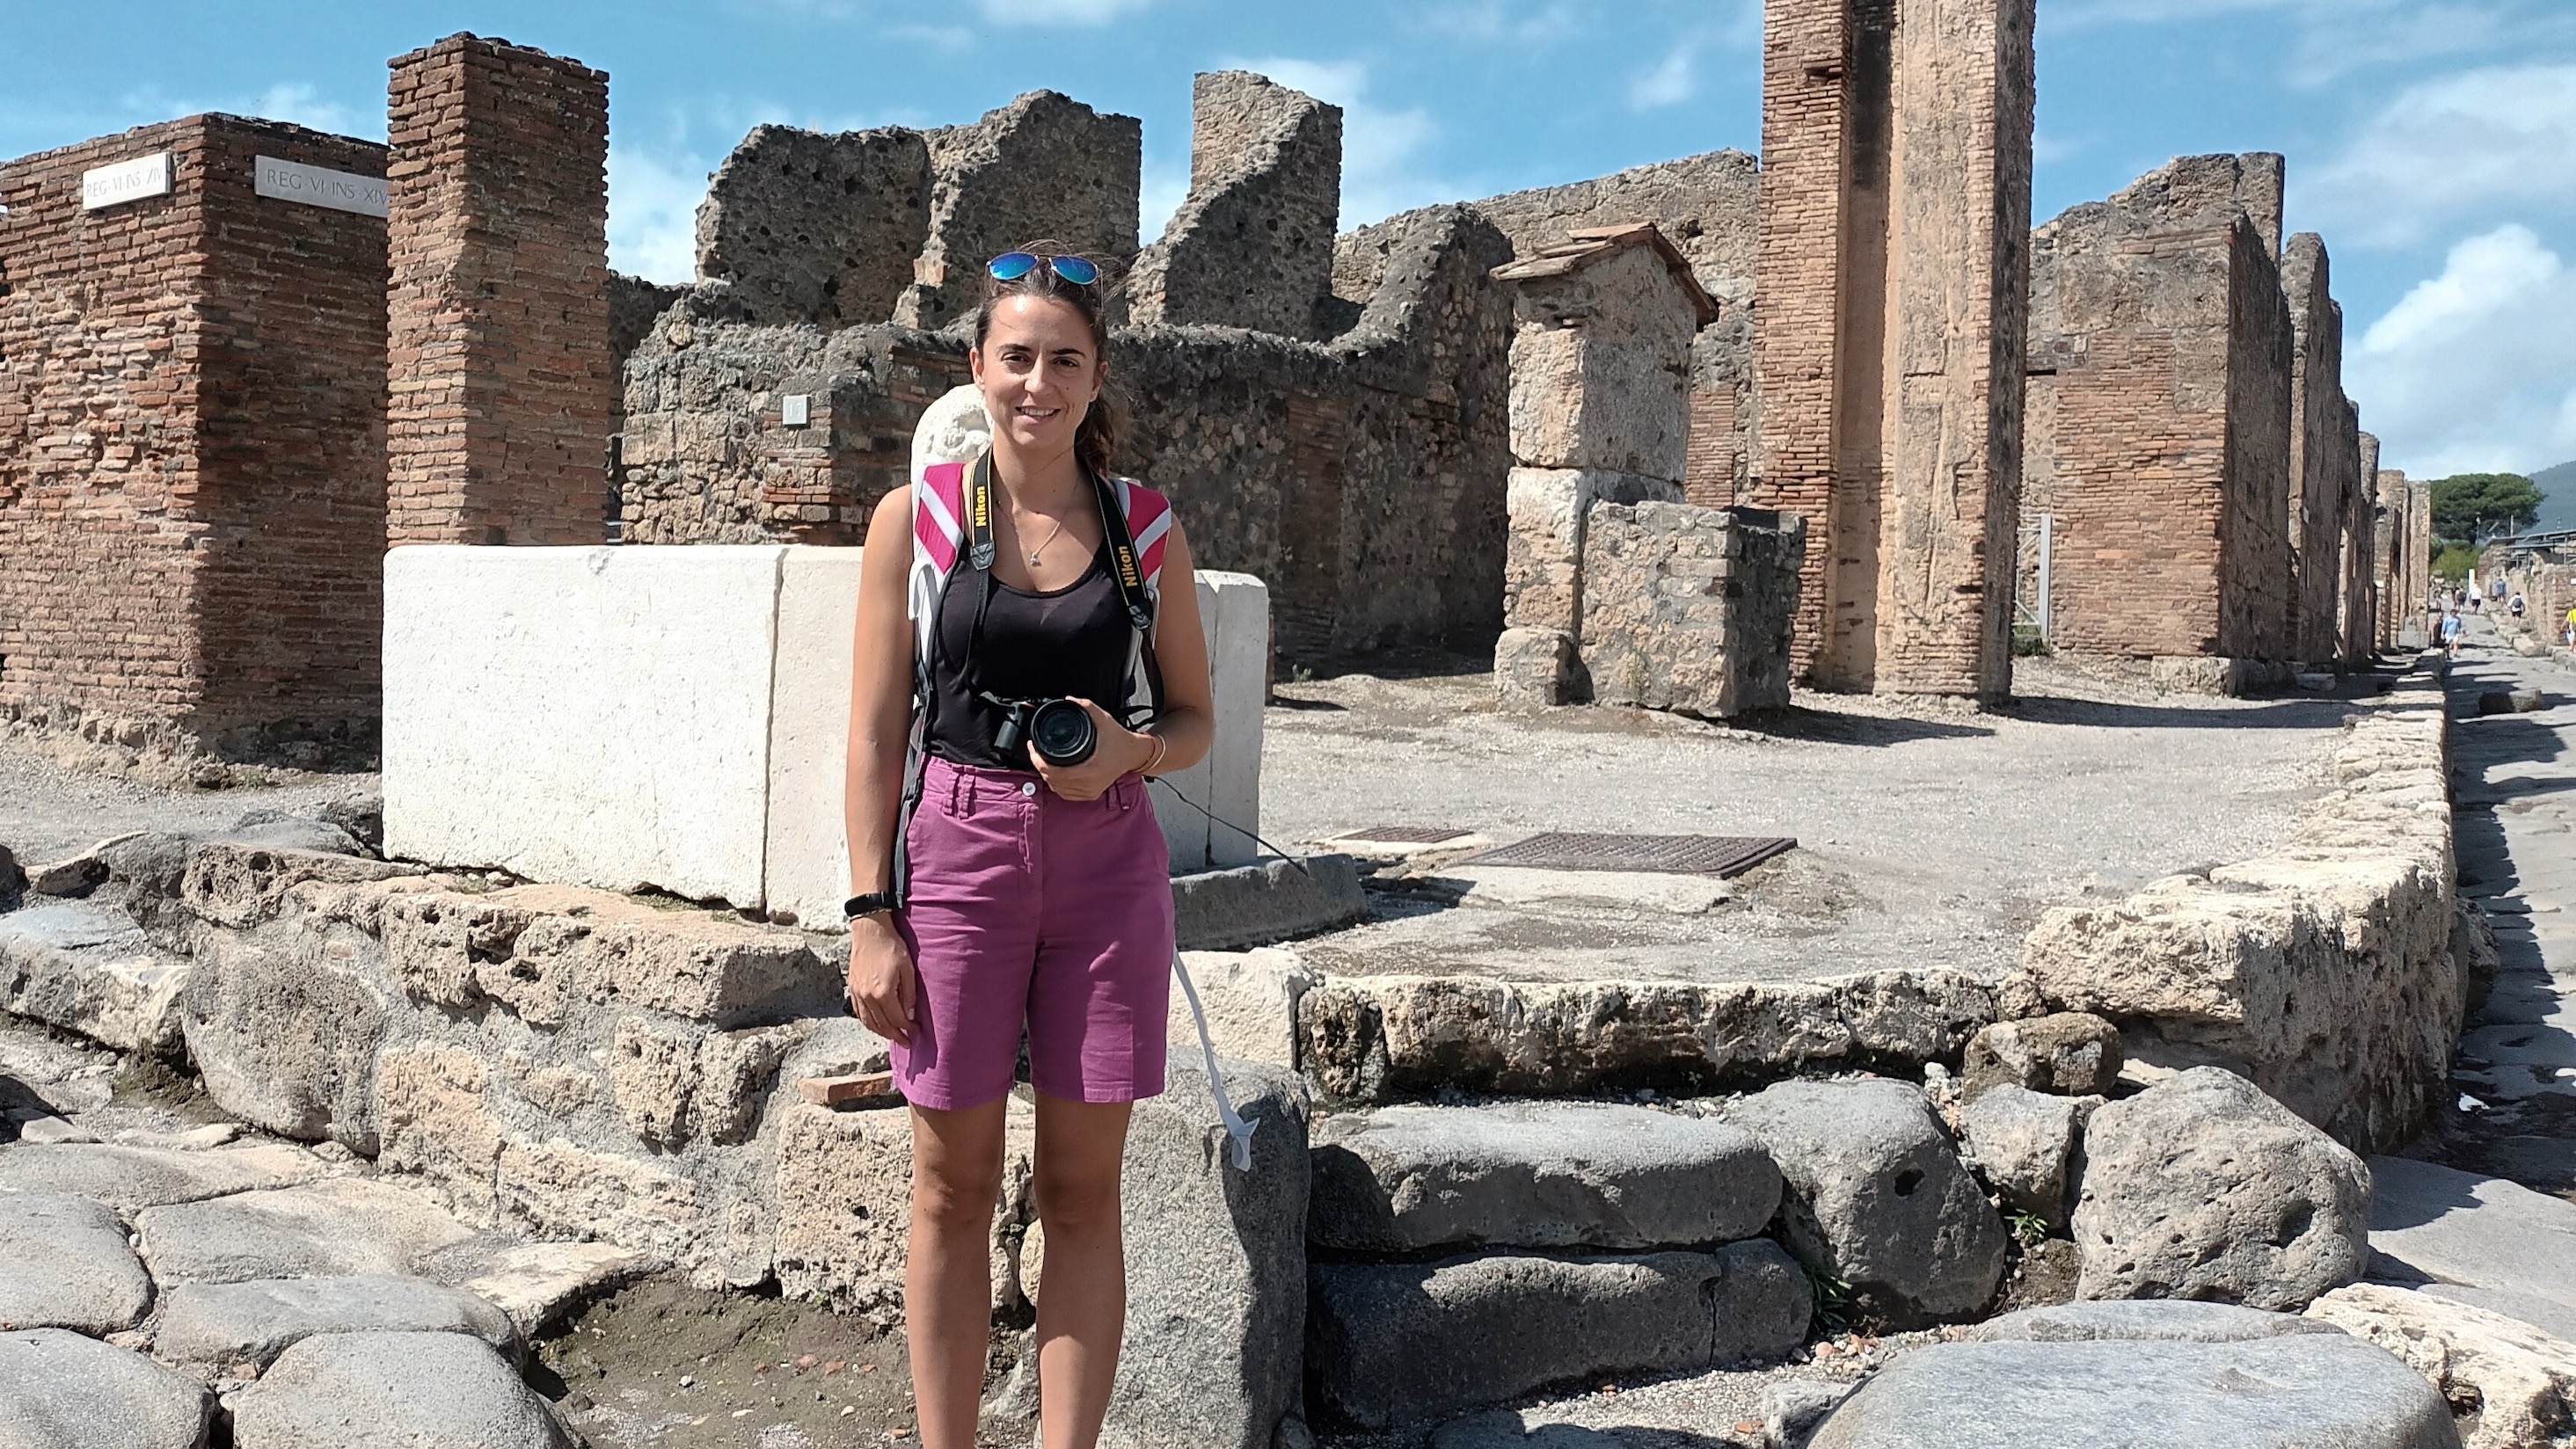 Luisa Seguin, PhD student in Linguistics, standing in front of the ruins of Pompei, in raspberry shorts and a black tank-top, holding a camera in her left hand and smiling.